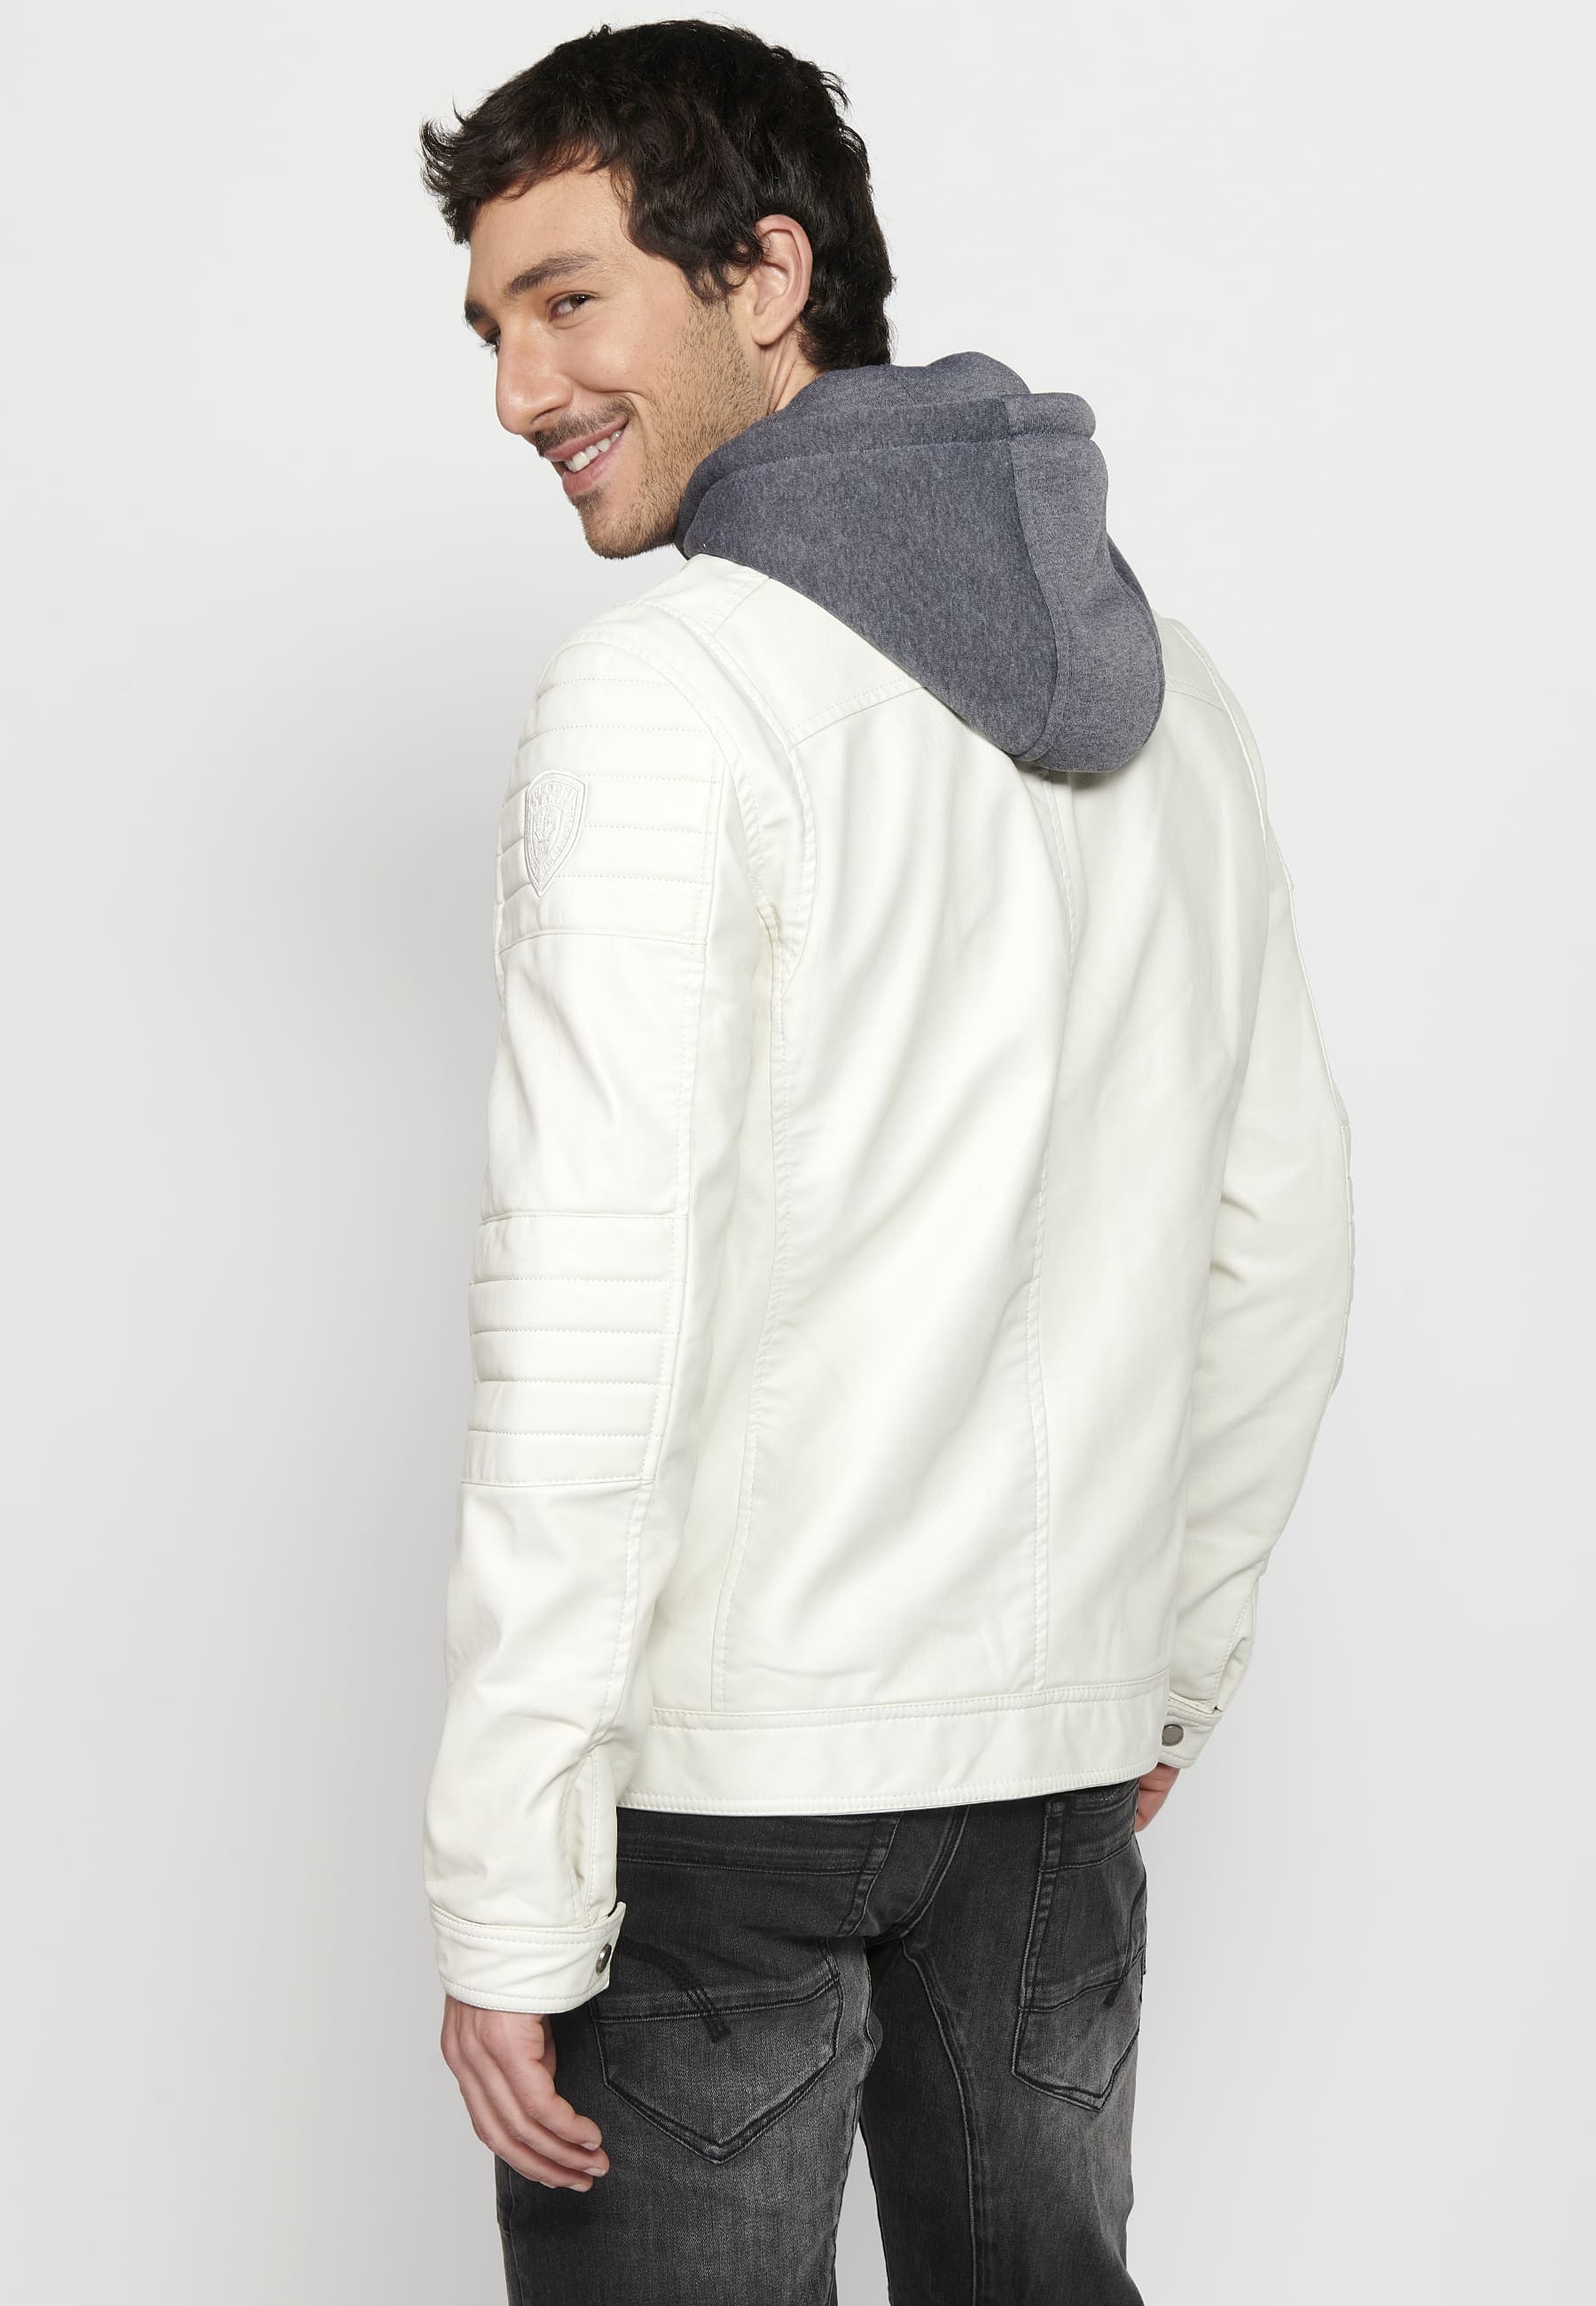 Long-sleeved jacket with zipper front closure and adjustable detachable hooded collar with drawstring in Ecru for Men 7